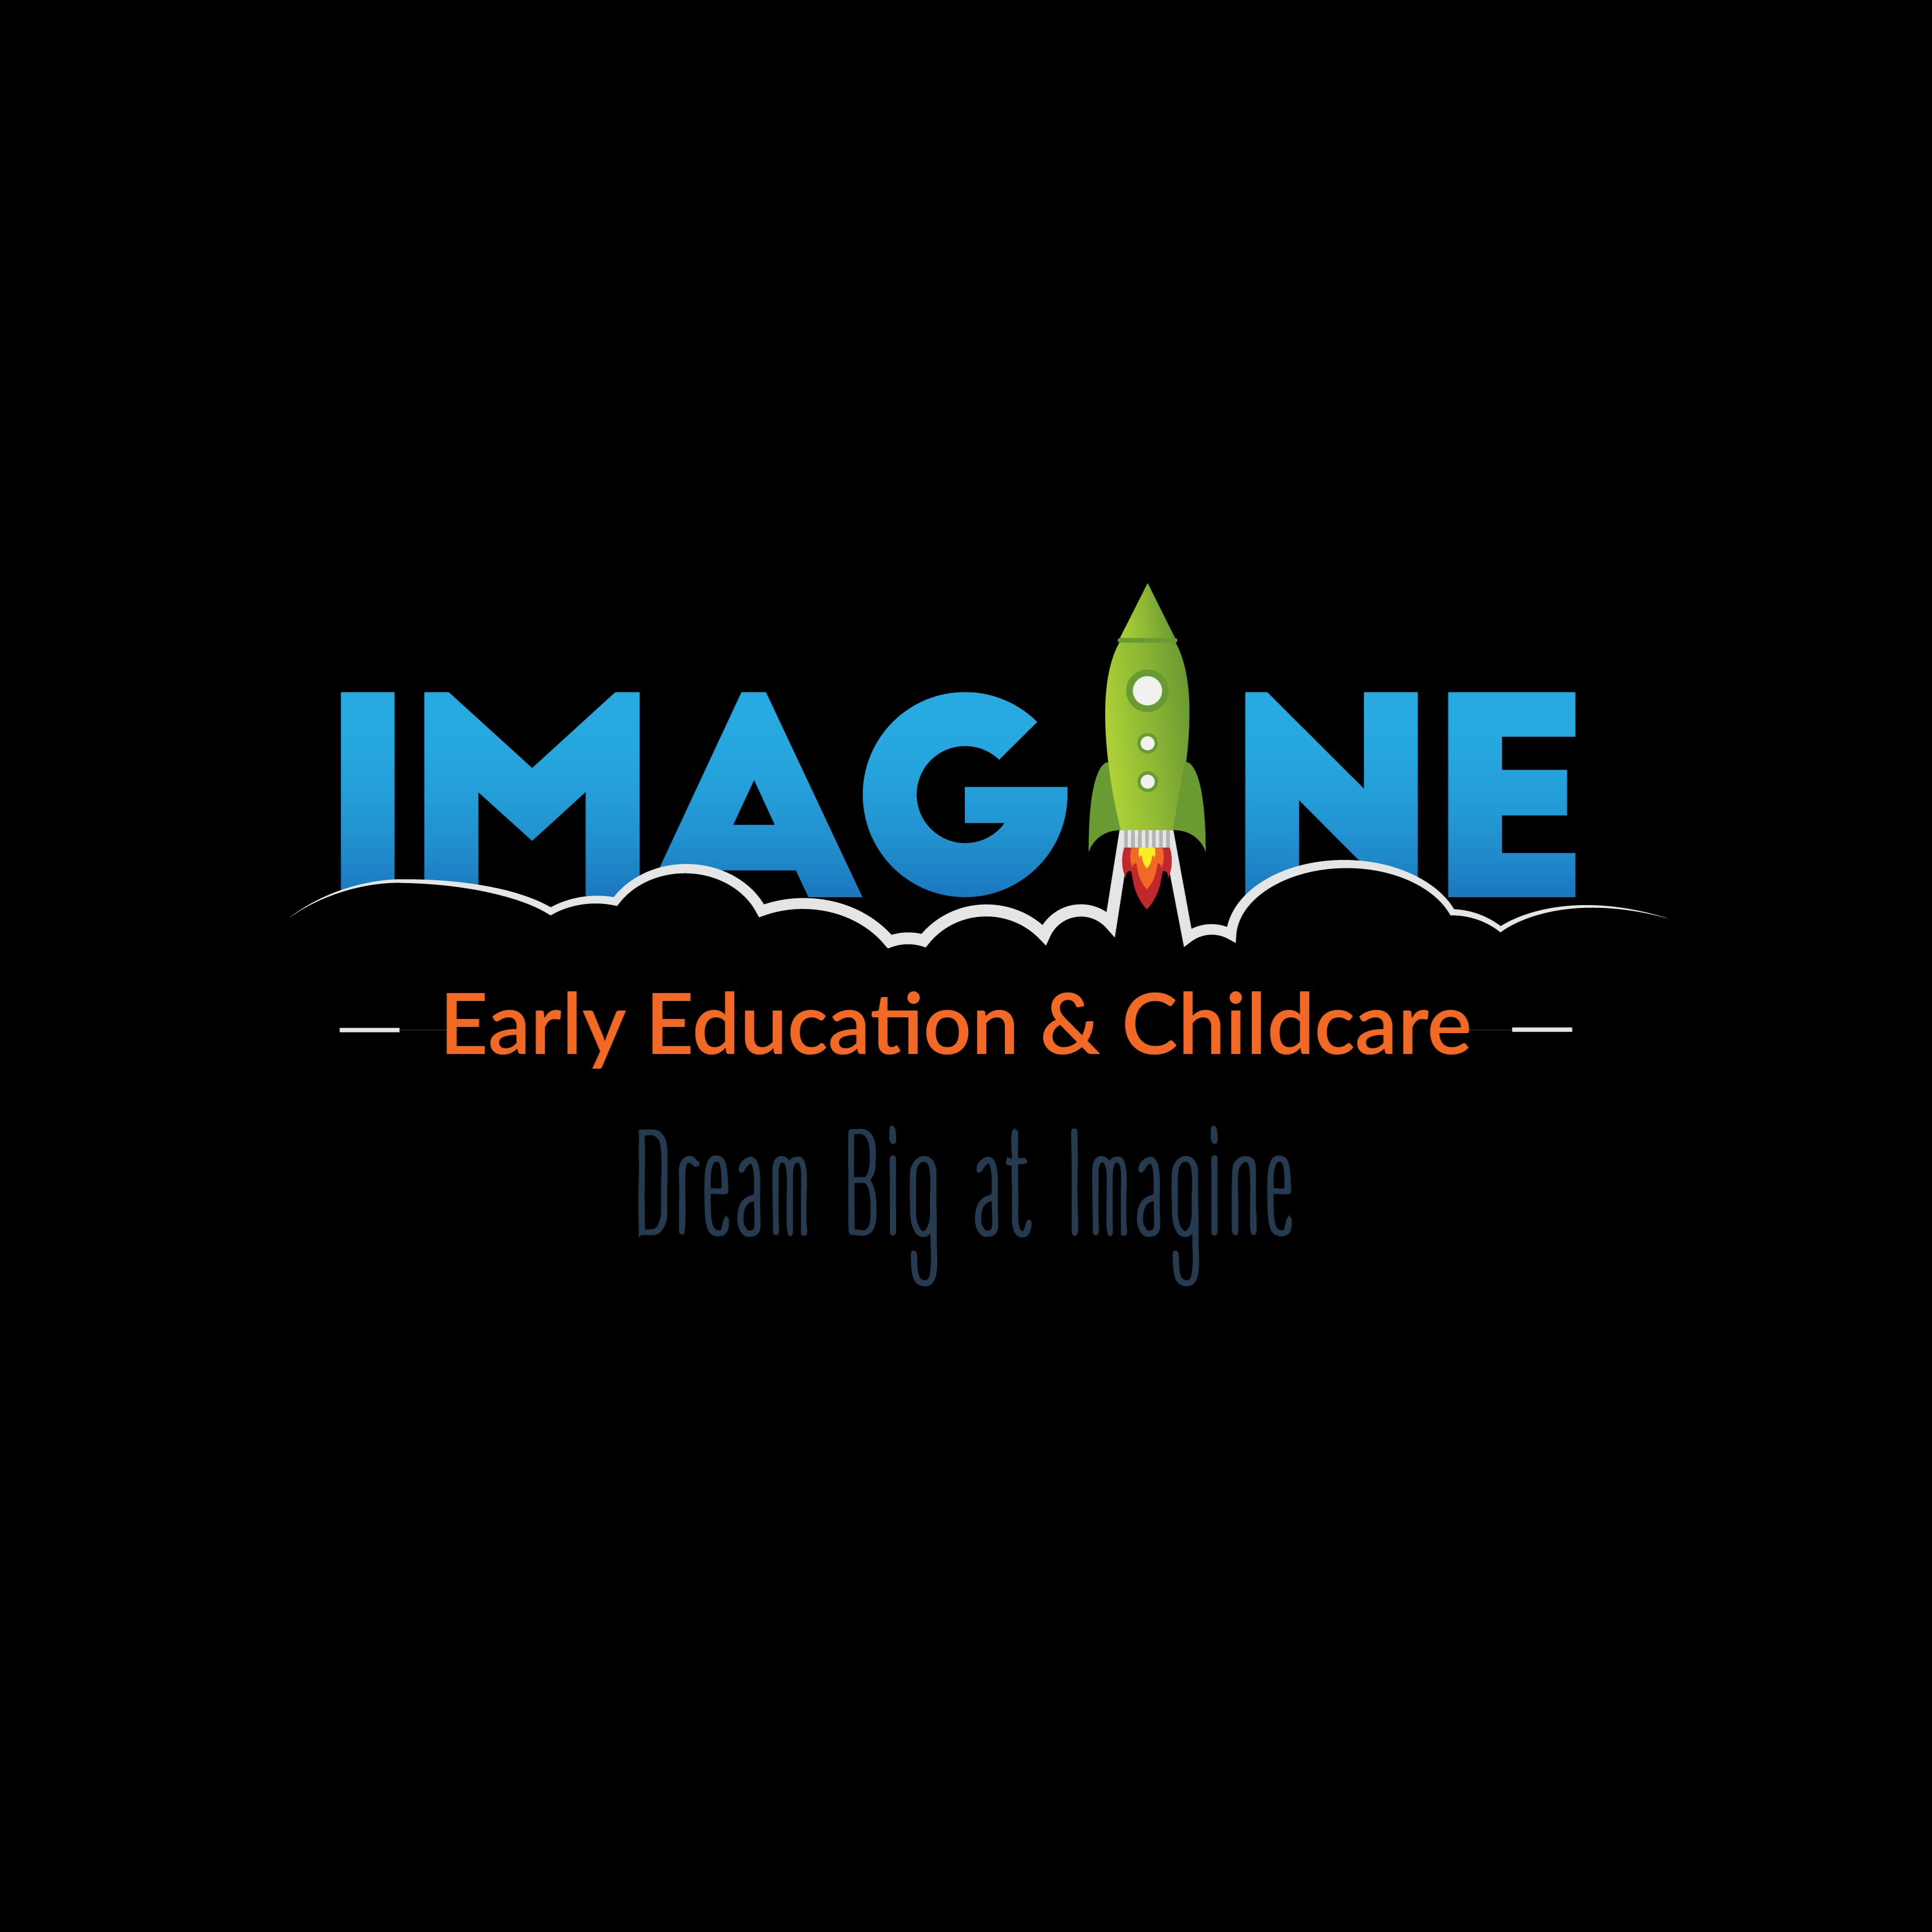 Imagine Early Education and Childcare of Parker - Parker, CO 80138 - (833)742-4453 | ShowMeLocal.com